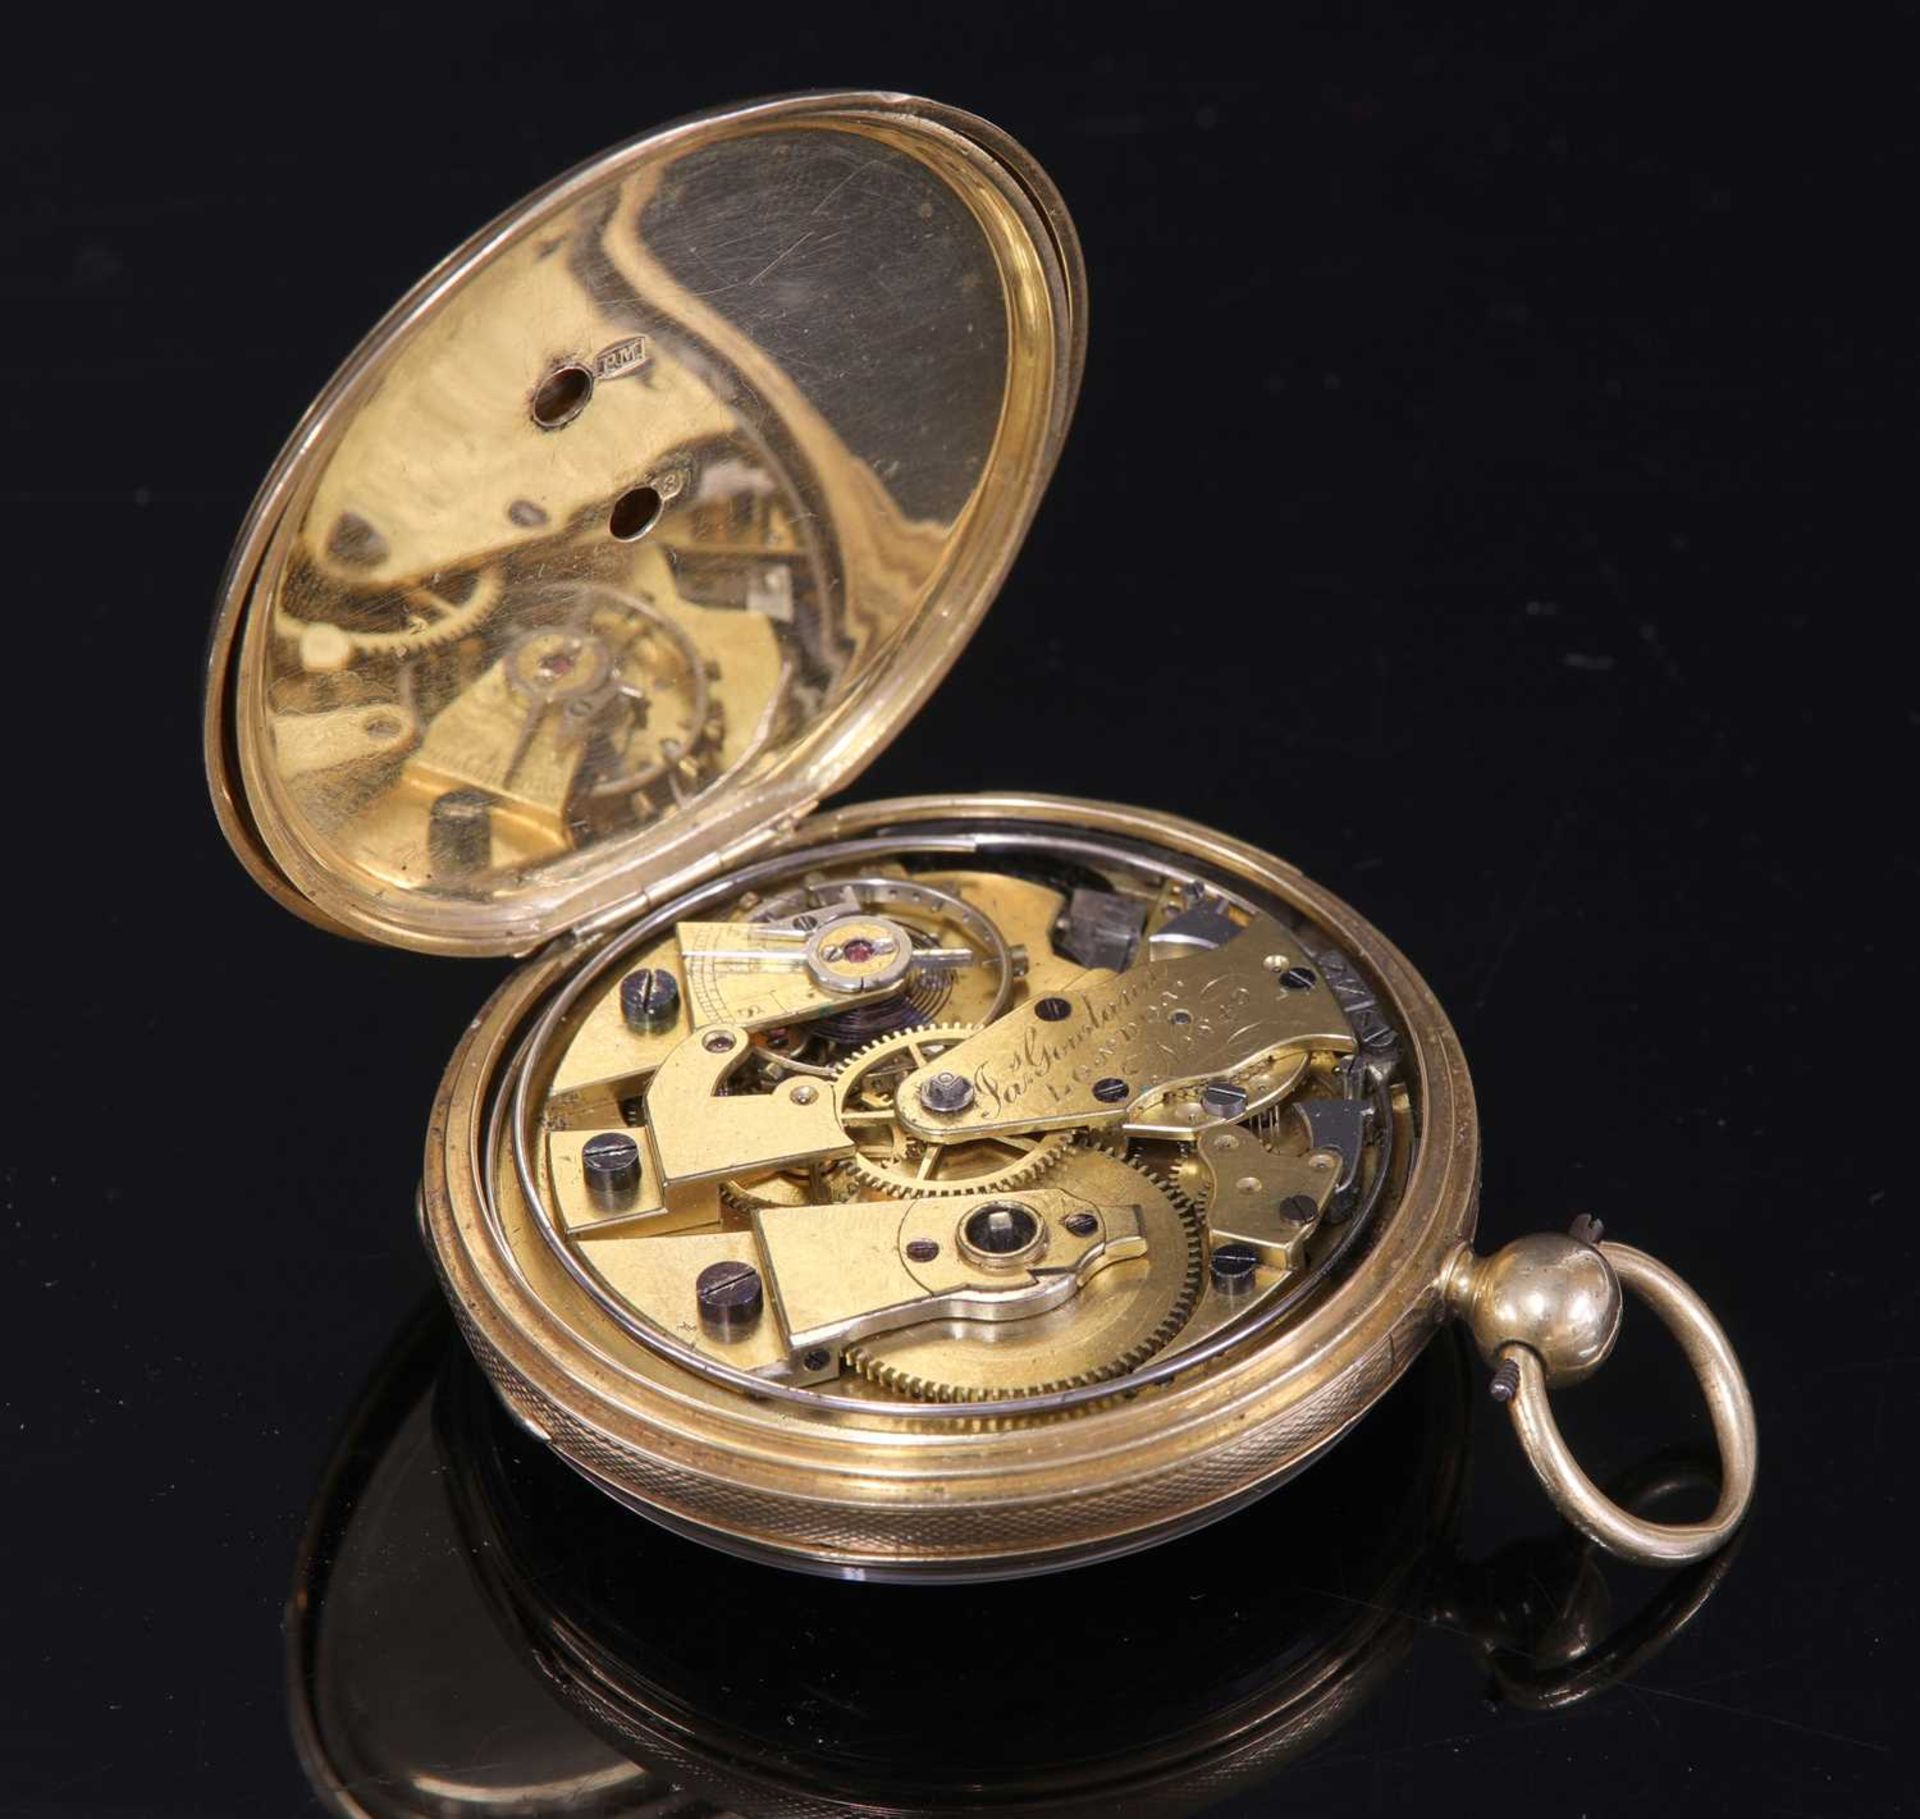 An 18ct gold key wound quarter repeater open-faced pocket watch, - Image 2 of 4